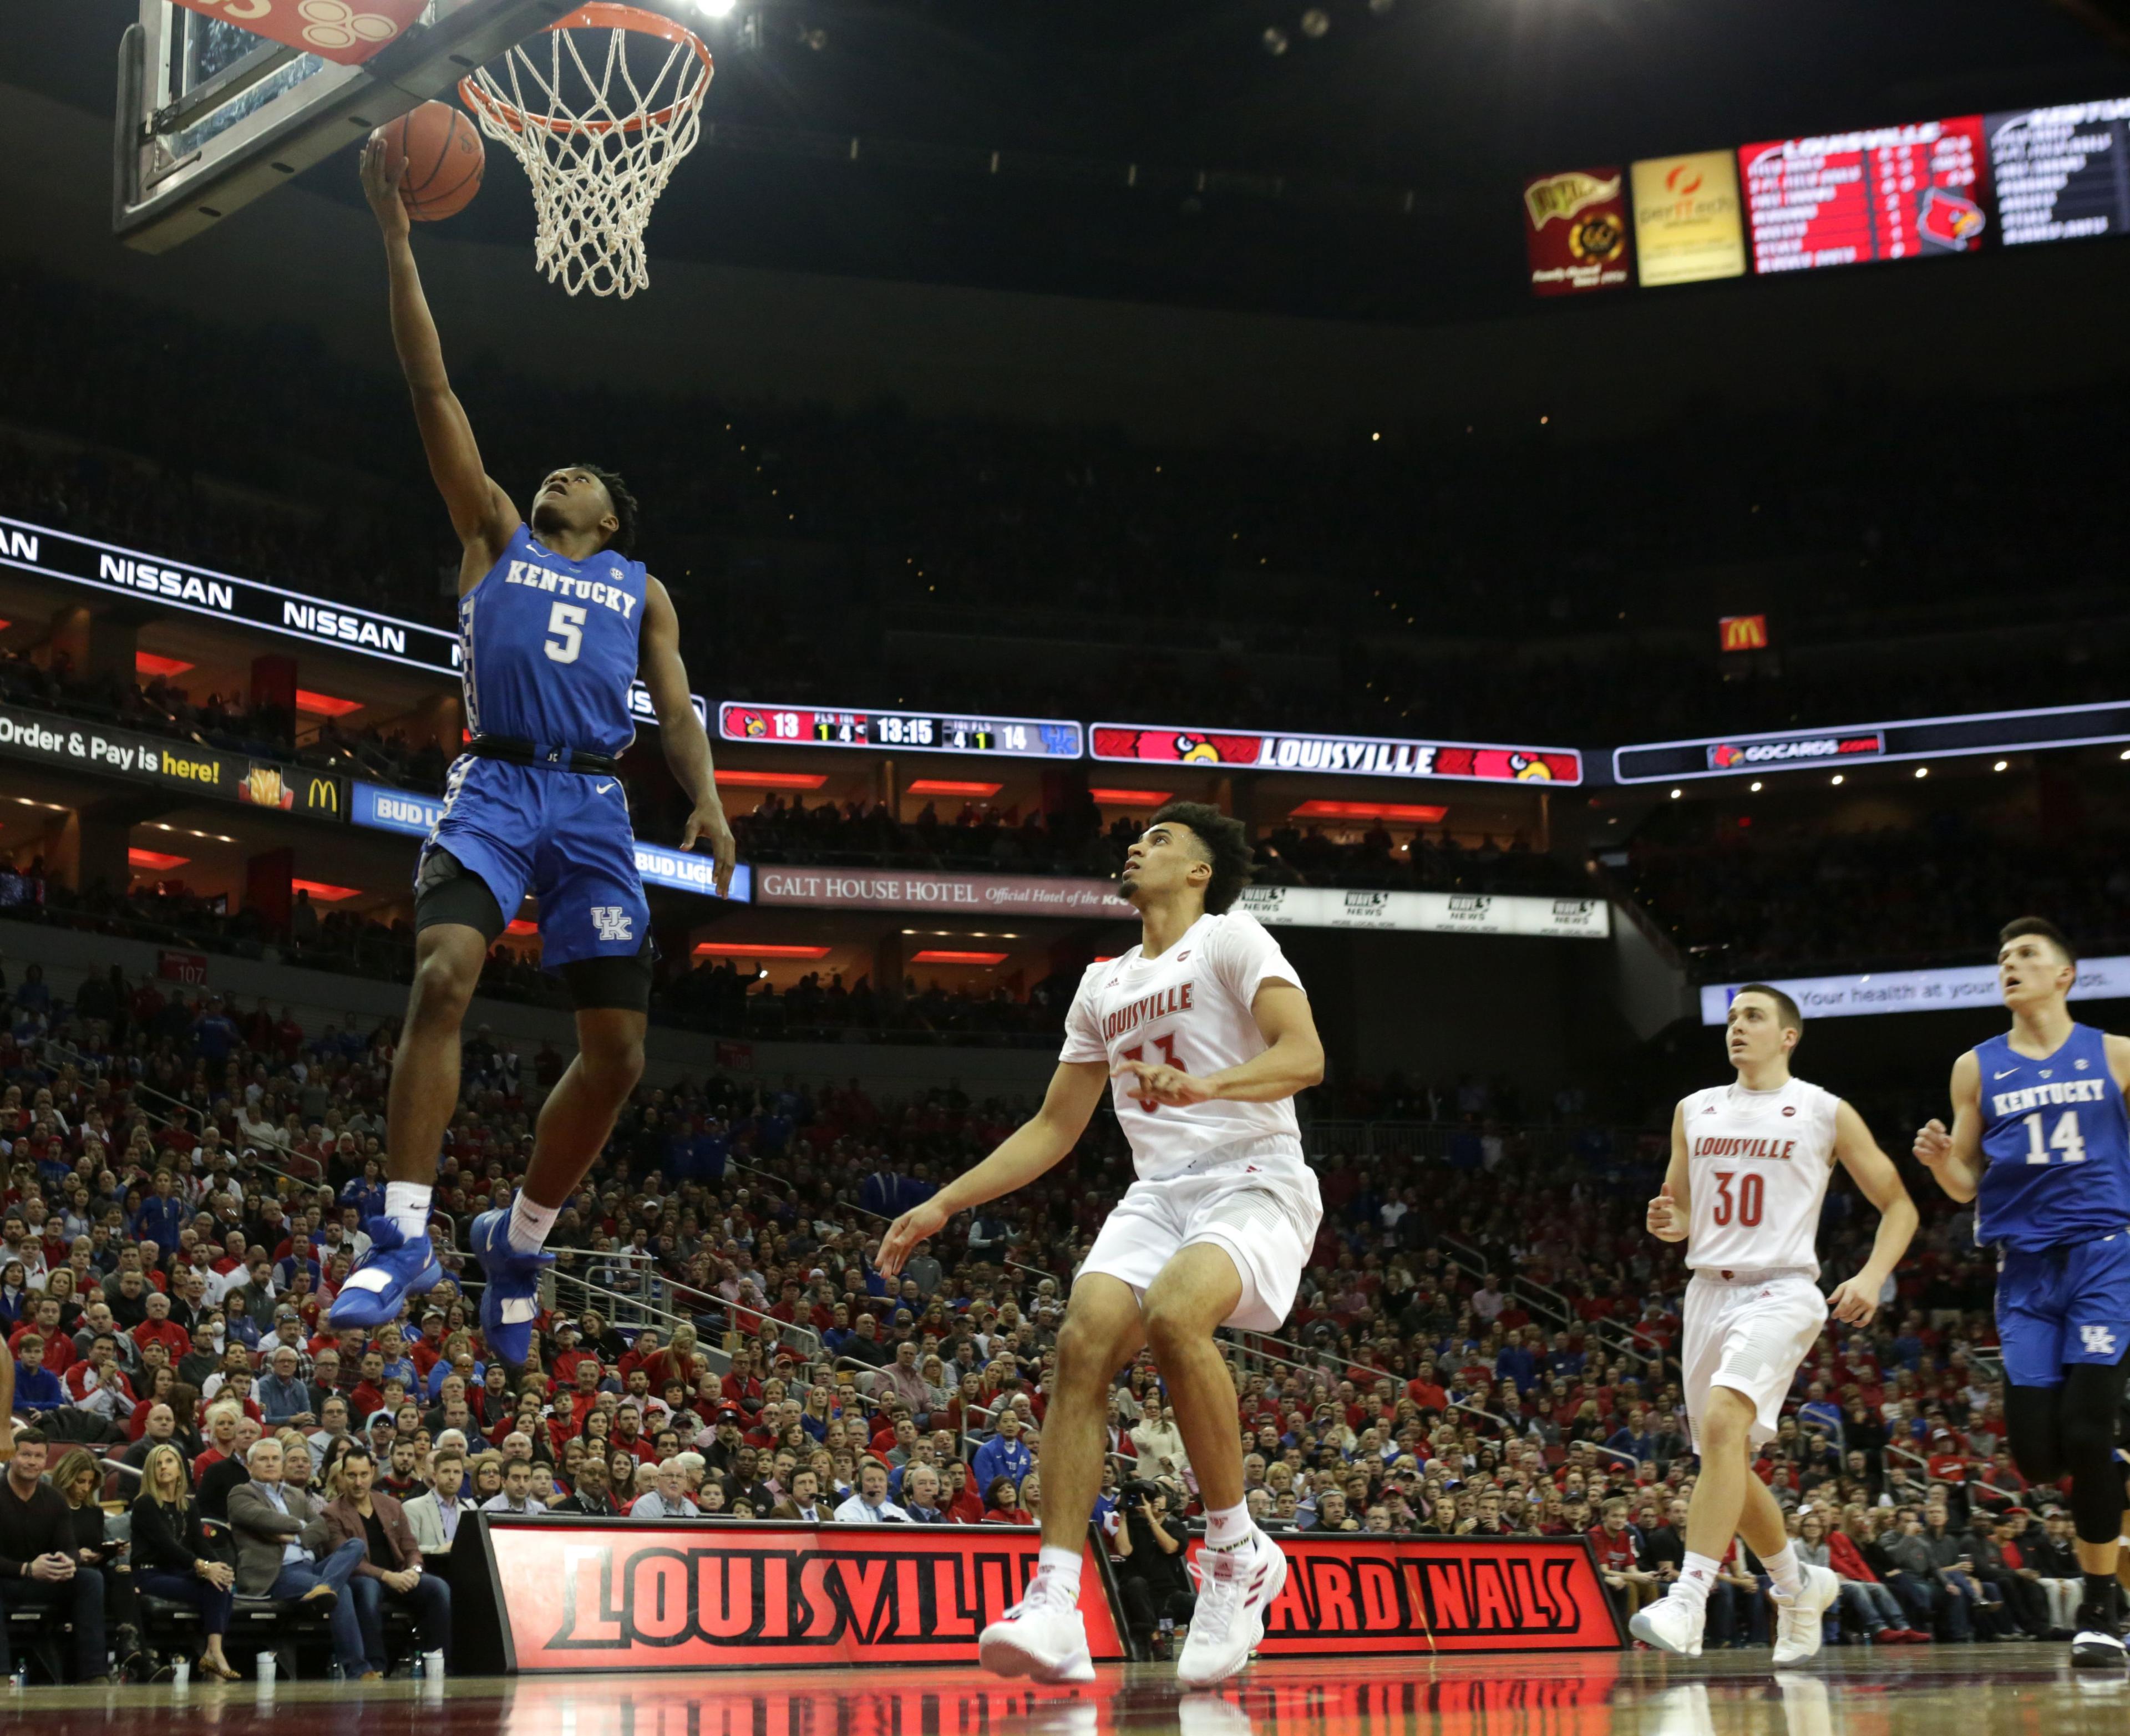 Kentucky's Immanuel Quickley / USA Today Sports